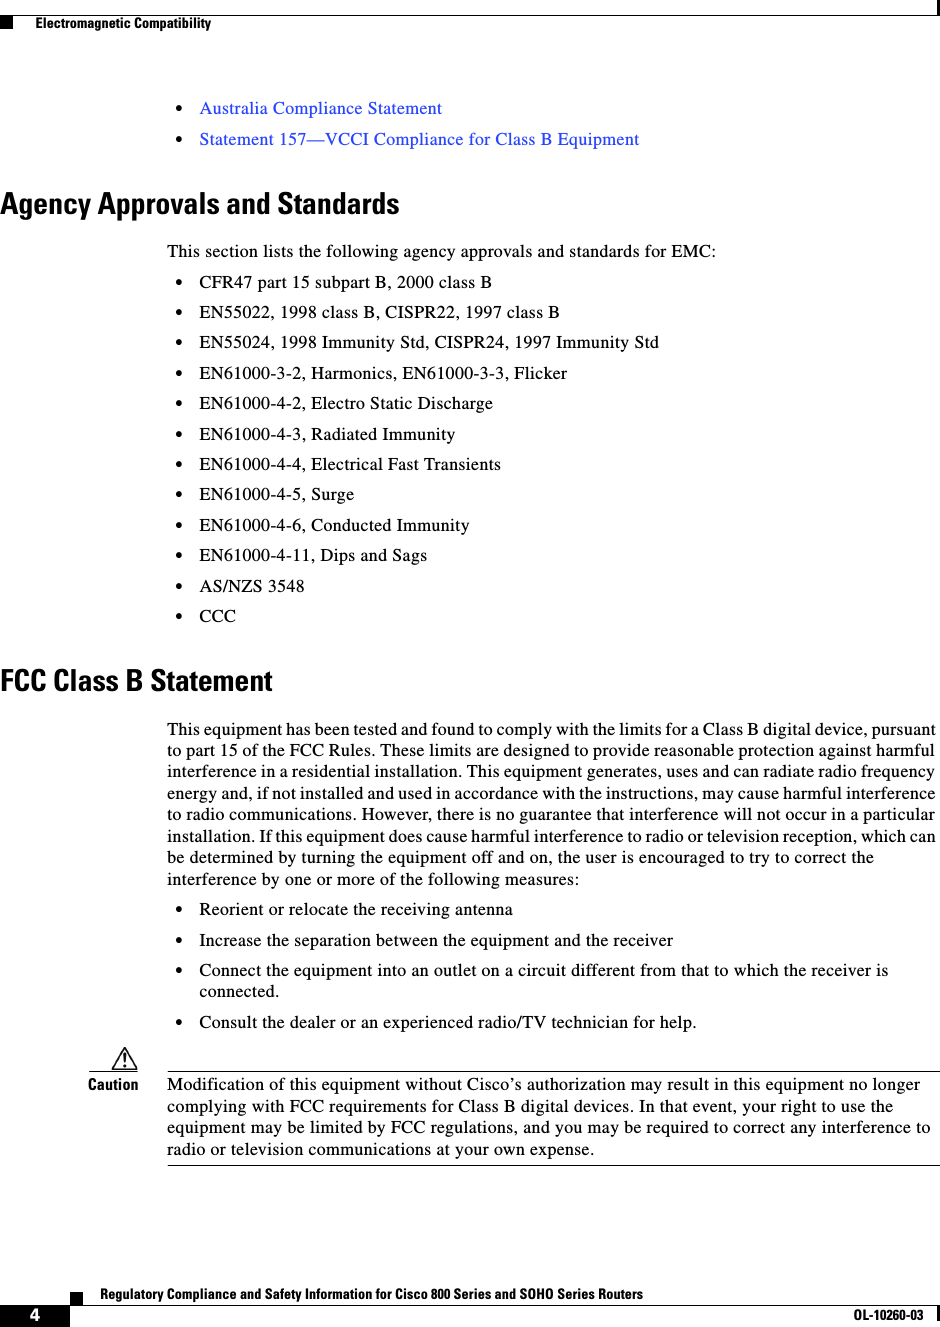  4Regulatory Compliance and Safety Information for Cisco 800 Series and SOHO Series RoutersOL-10260-03  Electromagnetic Compatibility•Australia Compliance Statement•Statement 157—VCCI Compliance for Class B EquipmentAgency Approvals and StandardsThis section lists the following agency approvals and standards for EMC:•CFR47 part 15 subpart B, 2000 class B•EN55022, 1998 class B, CISPR22, 1997 class B•EN55024, 1998 Immunity Std, CISPR24, 1997 Immunity Std•EN61000-3-2, Harmonics, EN61000-3-3, Flicker•EN61000-4-2, Electro Static Discharge•EN61000-4-3, Radiated Immunity•EN61000-4-4, Electrical Fast Transients•EN61000-4-5, Surge•EN61000-4-6, Conducted Immunity•EN61000-4-11, Dips and Sags•AS/NZS 3548•CCCFCC Class B StatementThis equipment has been tested and found to comply with the limits for a Class B digital device, pursuant to part 15 of the FCC Rules. These limits are designed to provide reasonable protection against harmful interference in a residential installation. This equipment generates, uses and can radiate radio frequency energy and, if not installed and used in accordance with the instructions, may cause harmful interference to radio communications. However, there is no guarantee that interference will not occur in a particular installation. If this equipment does cause harmful interference to radio or television reception, which can be determined by turning the equipment off and on, the user is encouraged to try to correct the interference by one or more of the following measures:•Reorient or relocate the receiving antenna•Increase the separation between the equipment and the receiver•Connect the equipment into an outlet on a circuit different from that to which the receiver is connected.•Consult the dealer or an experienced radio/TV technician for help.Caution Modification of this equipment without Cisco’s authorization may result in this equipment no longer complying with FCC requirements for Class B digital devices. In that event, your right to use the equipment may be limited by FCC regulations, and you may be required to correct any interference to radio or television communications at your own expense.